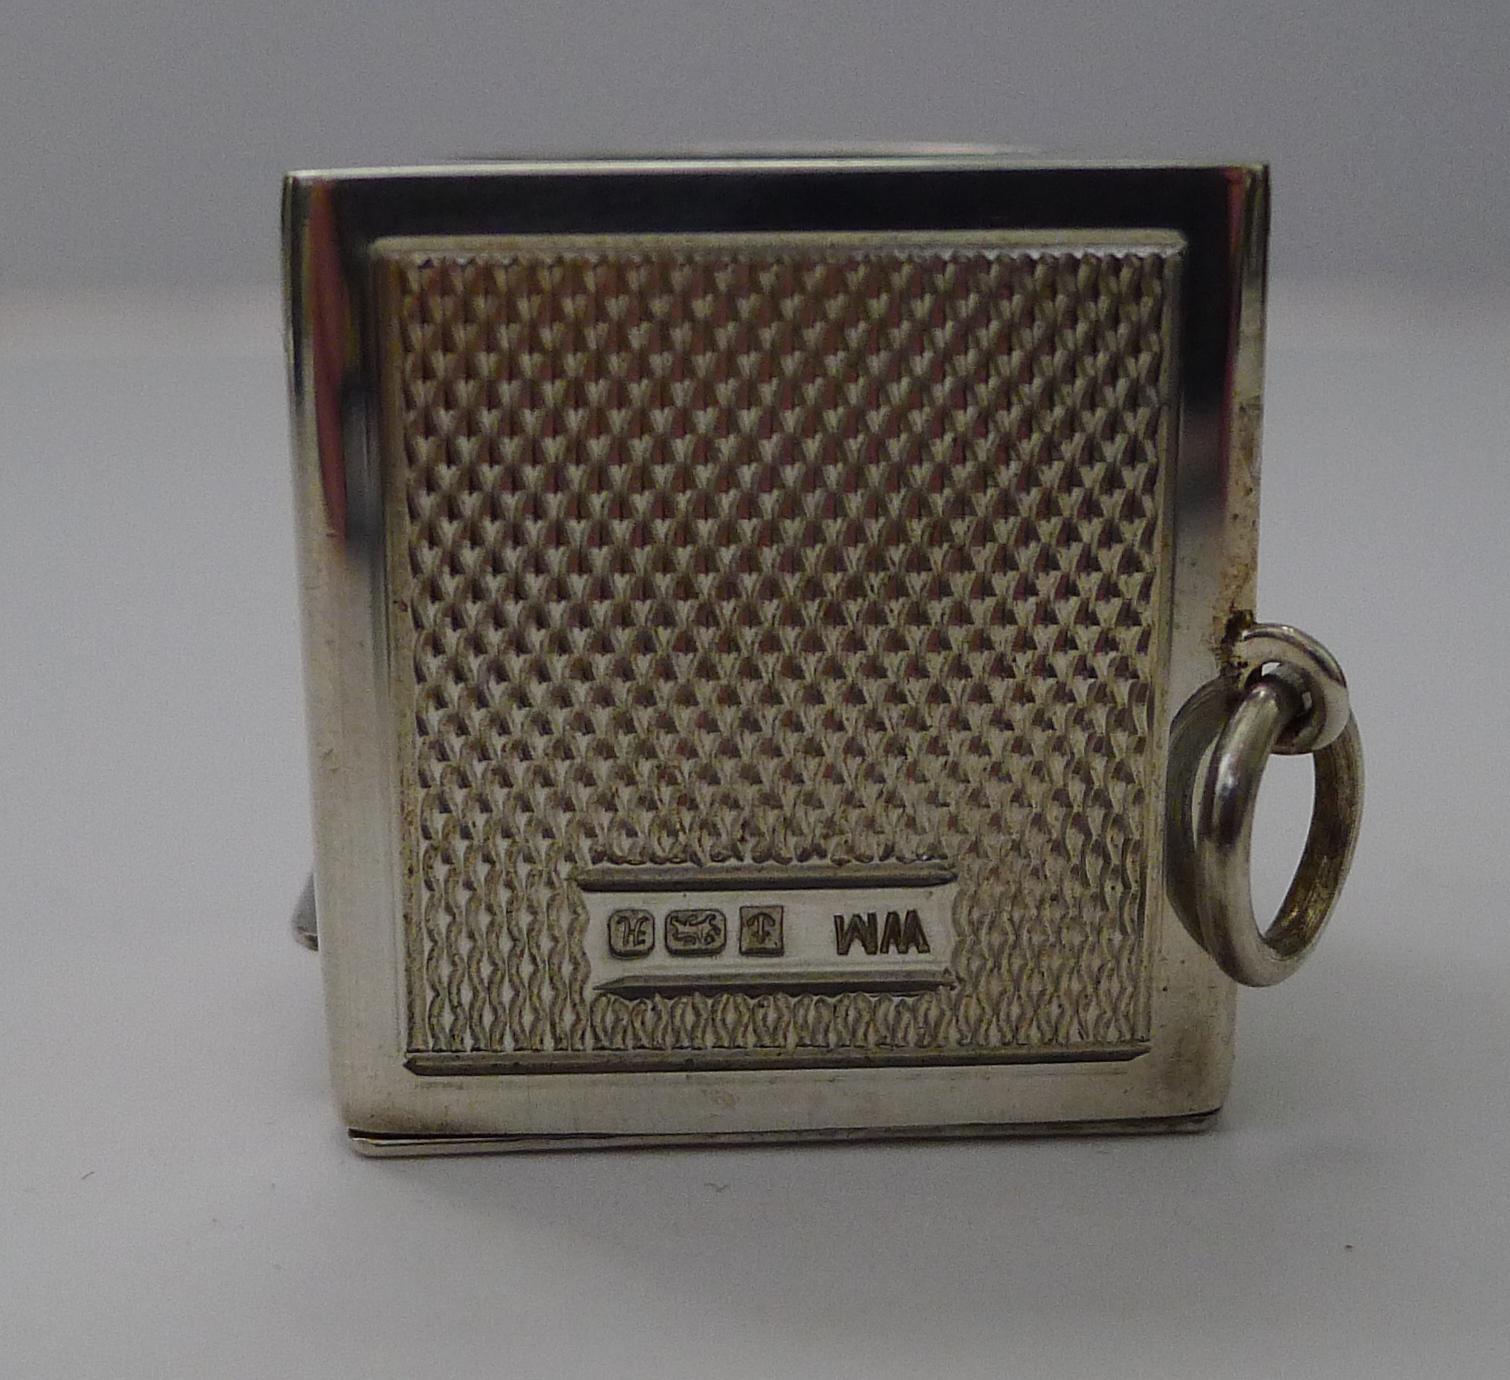 A handsome English solid /sterling silver cue chalk holder fully hallmarked for Birmingham 1982 in superb unused condition with it's original (plastic) presentation box which has done a great job protecting this little gem.  The makers mark is also